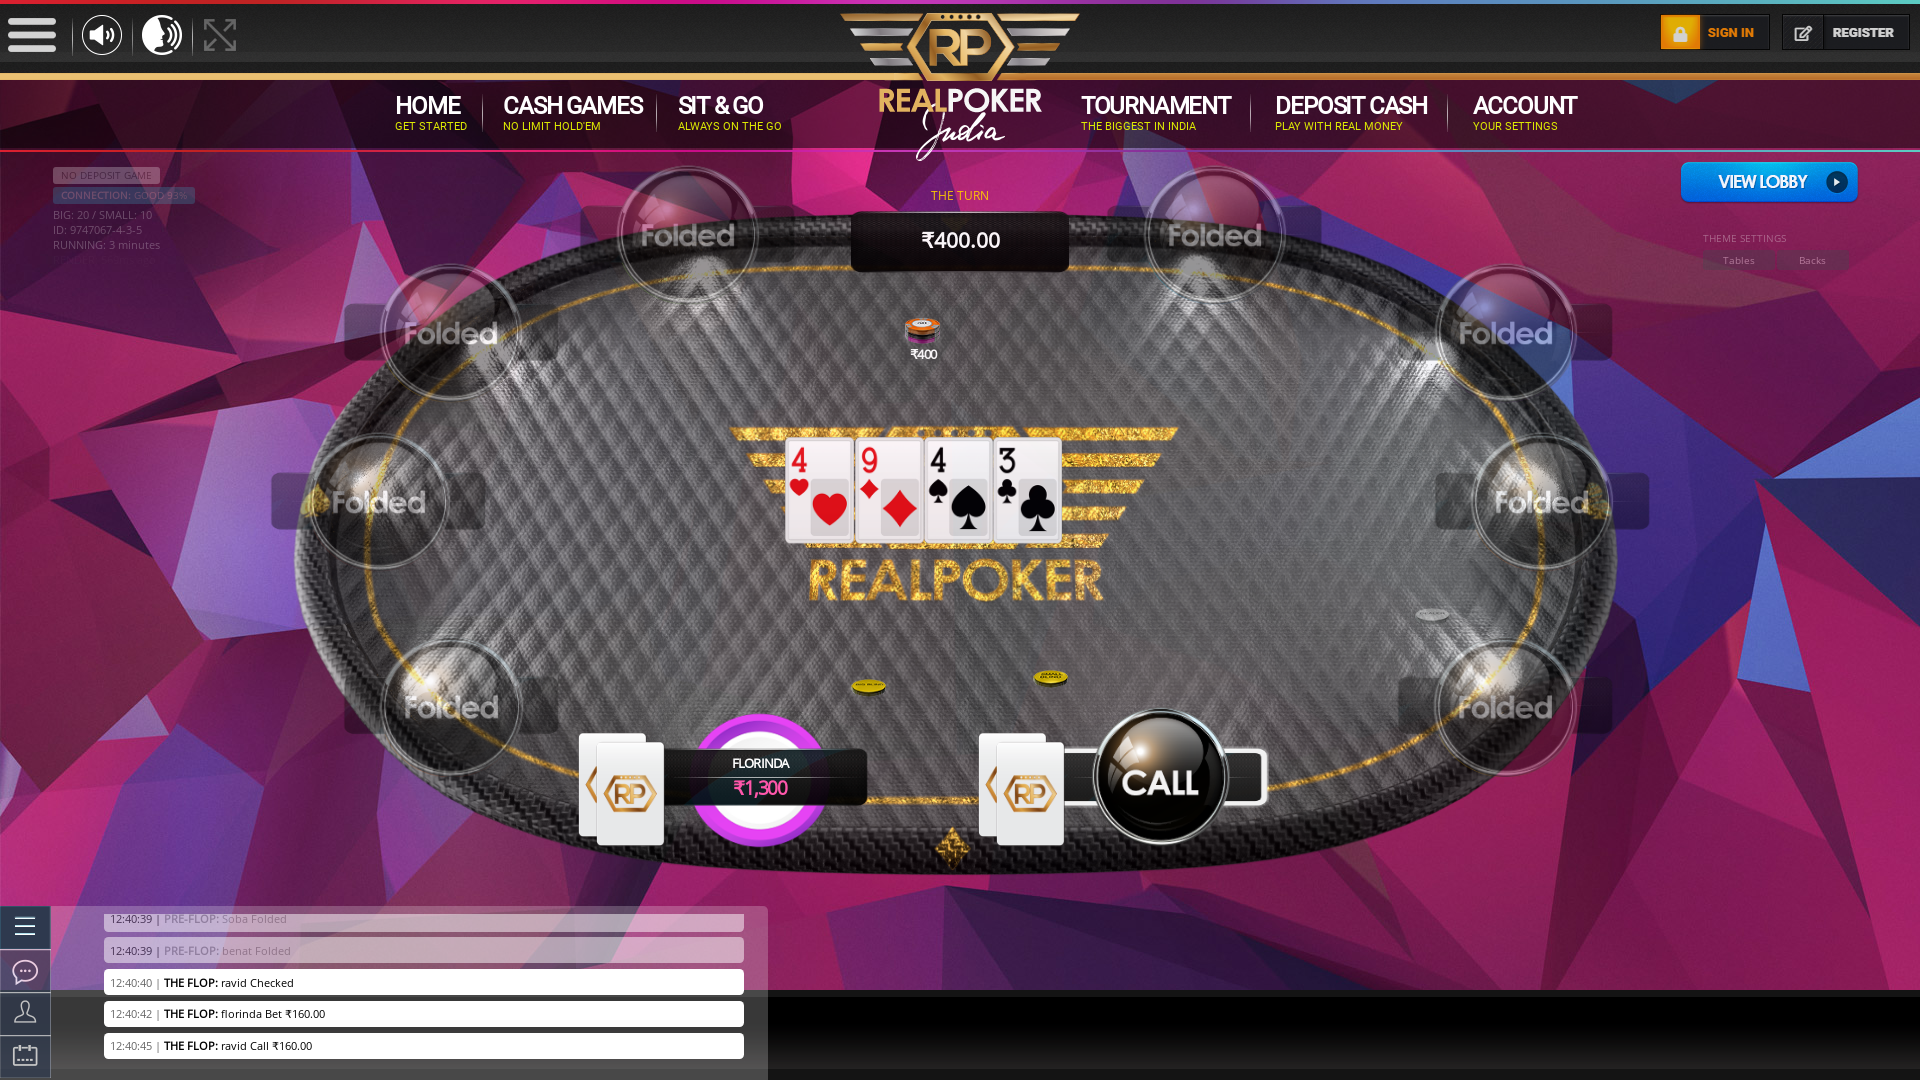 10 player texas holdem table at real poker with the table id 9747067